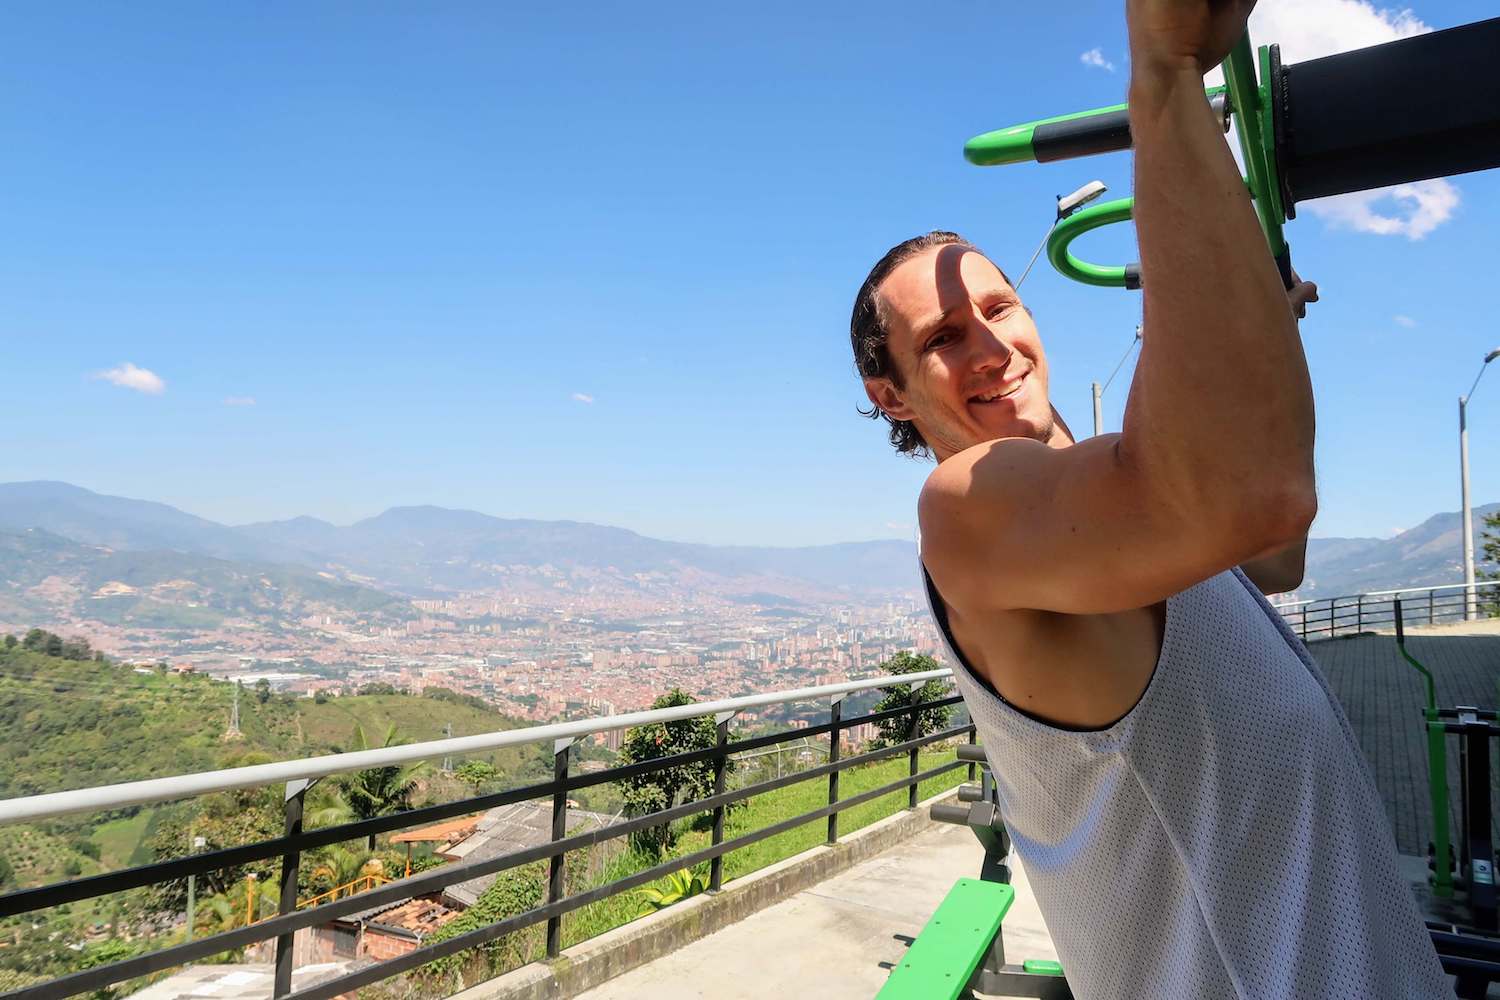 Chris workout out at Arenales viewpoint of Medellin after waterfall hike